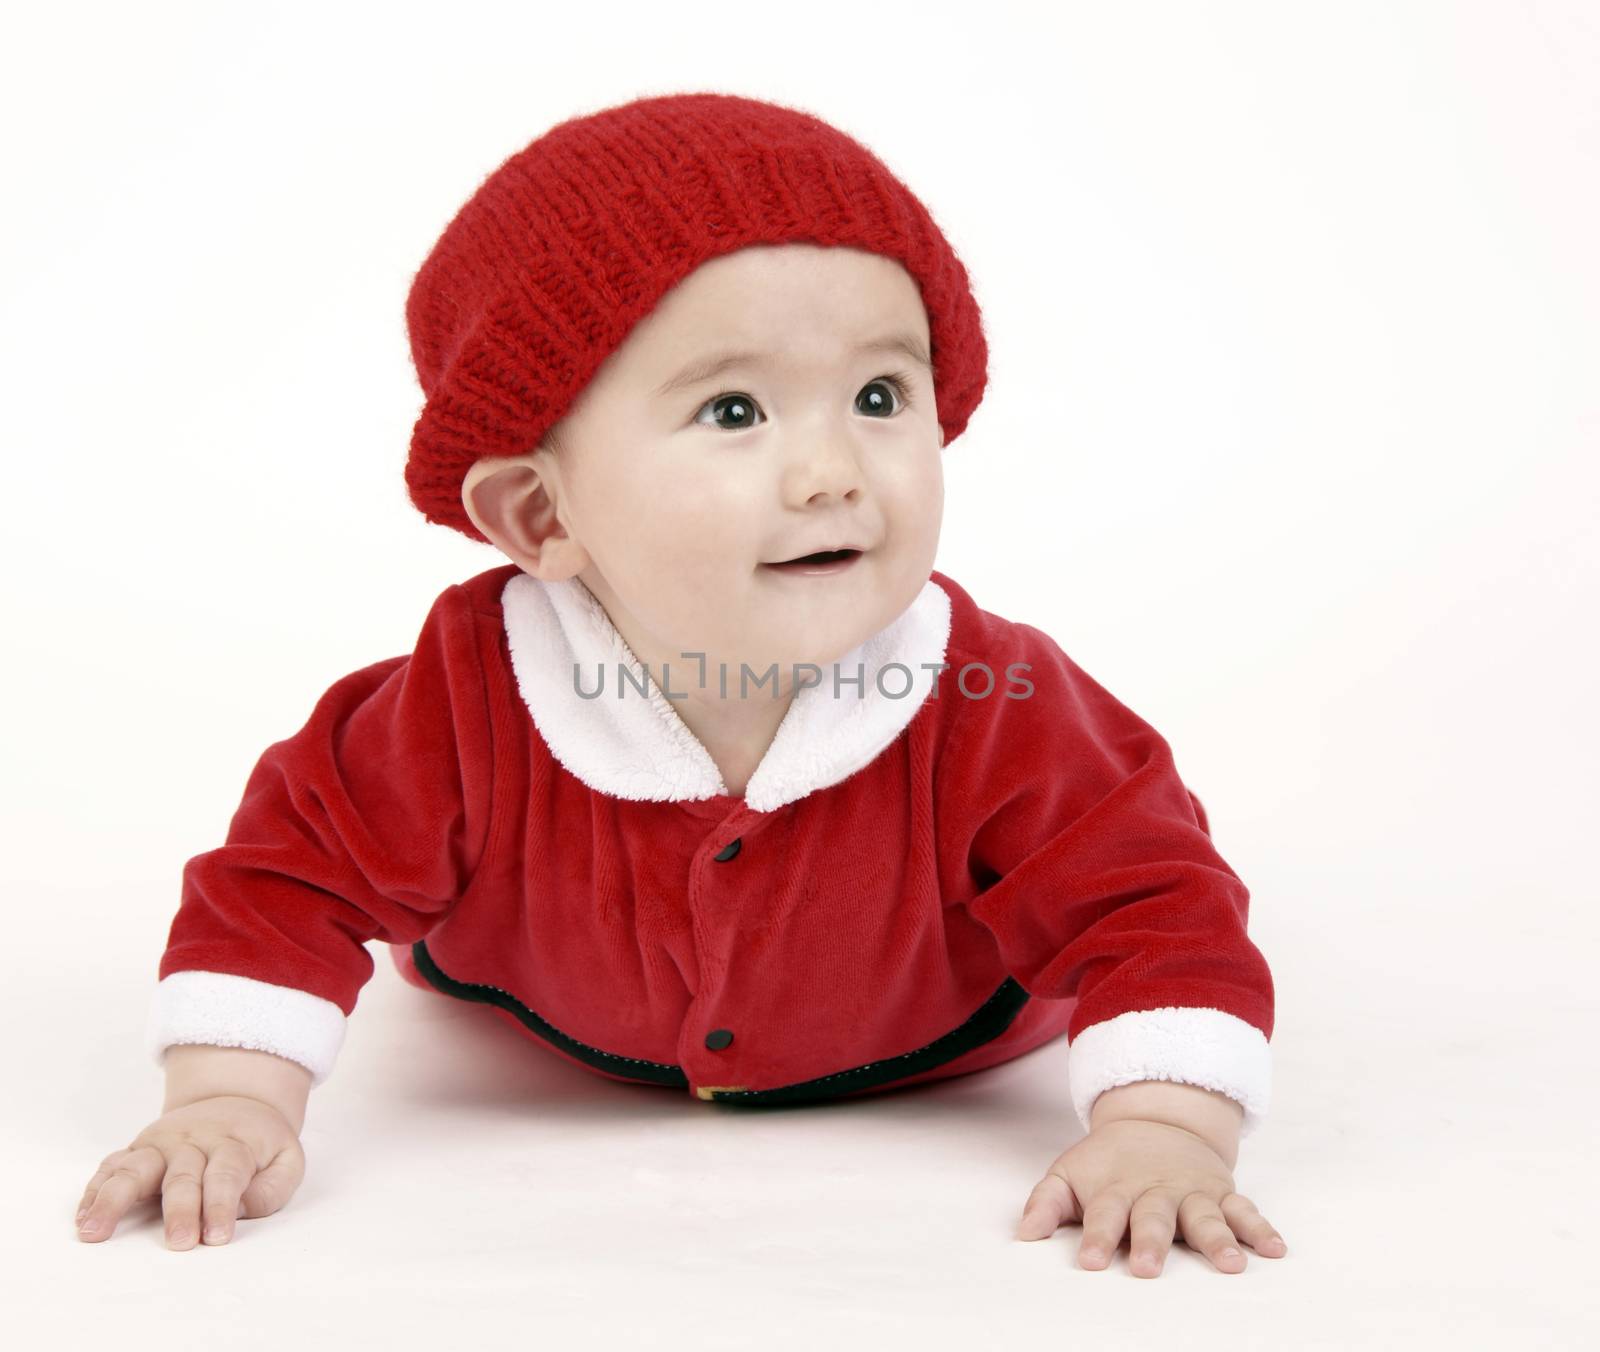 Infant Boy Sits up on Hands LOOKING out under his red hat by ChrisBoswell